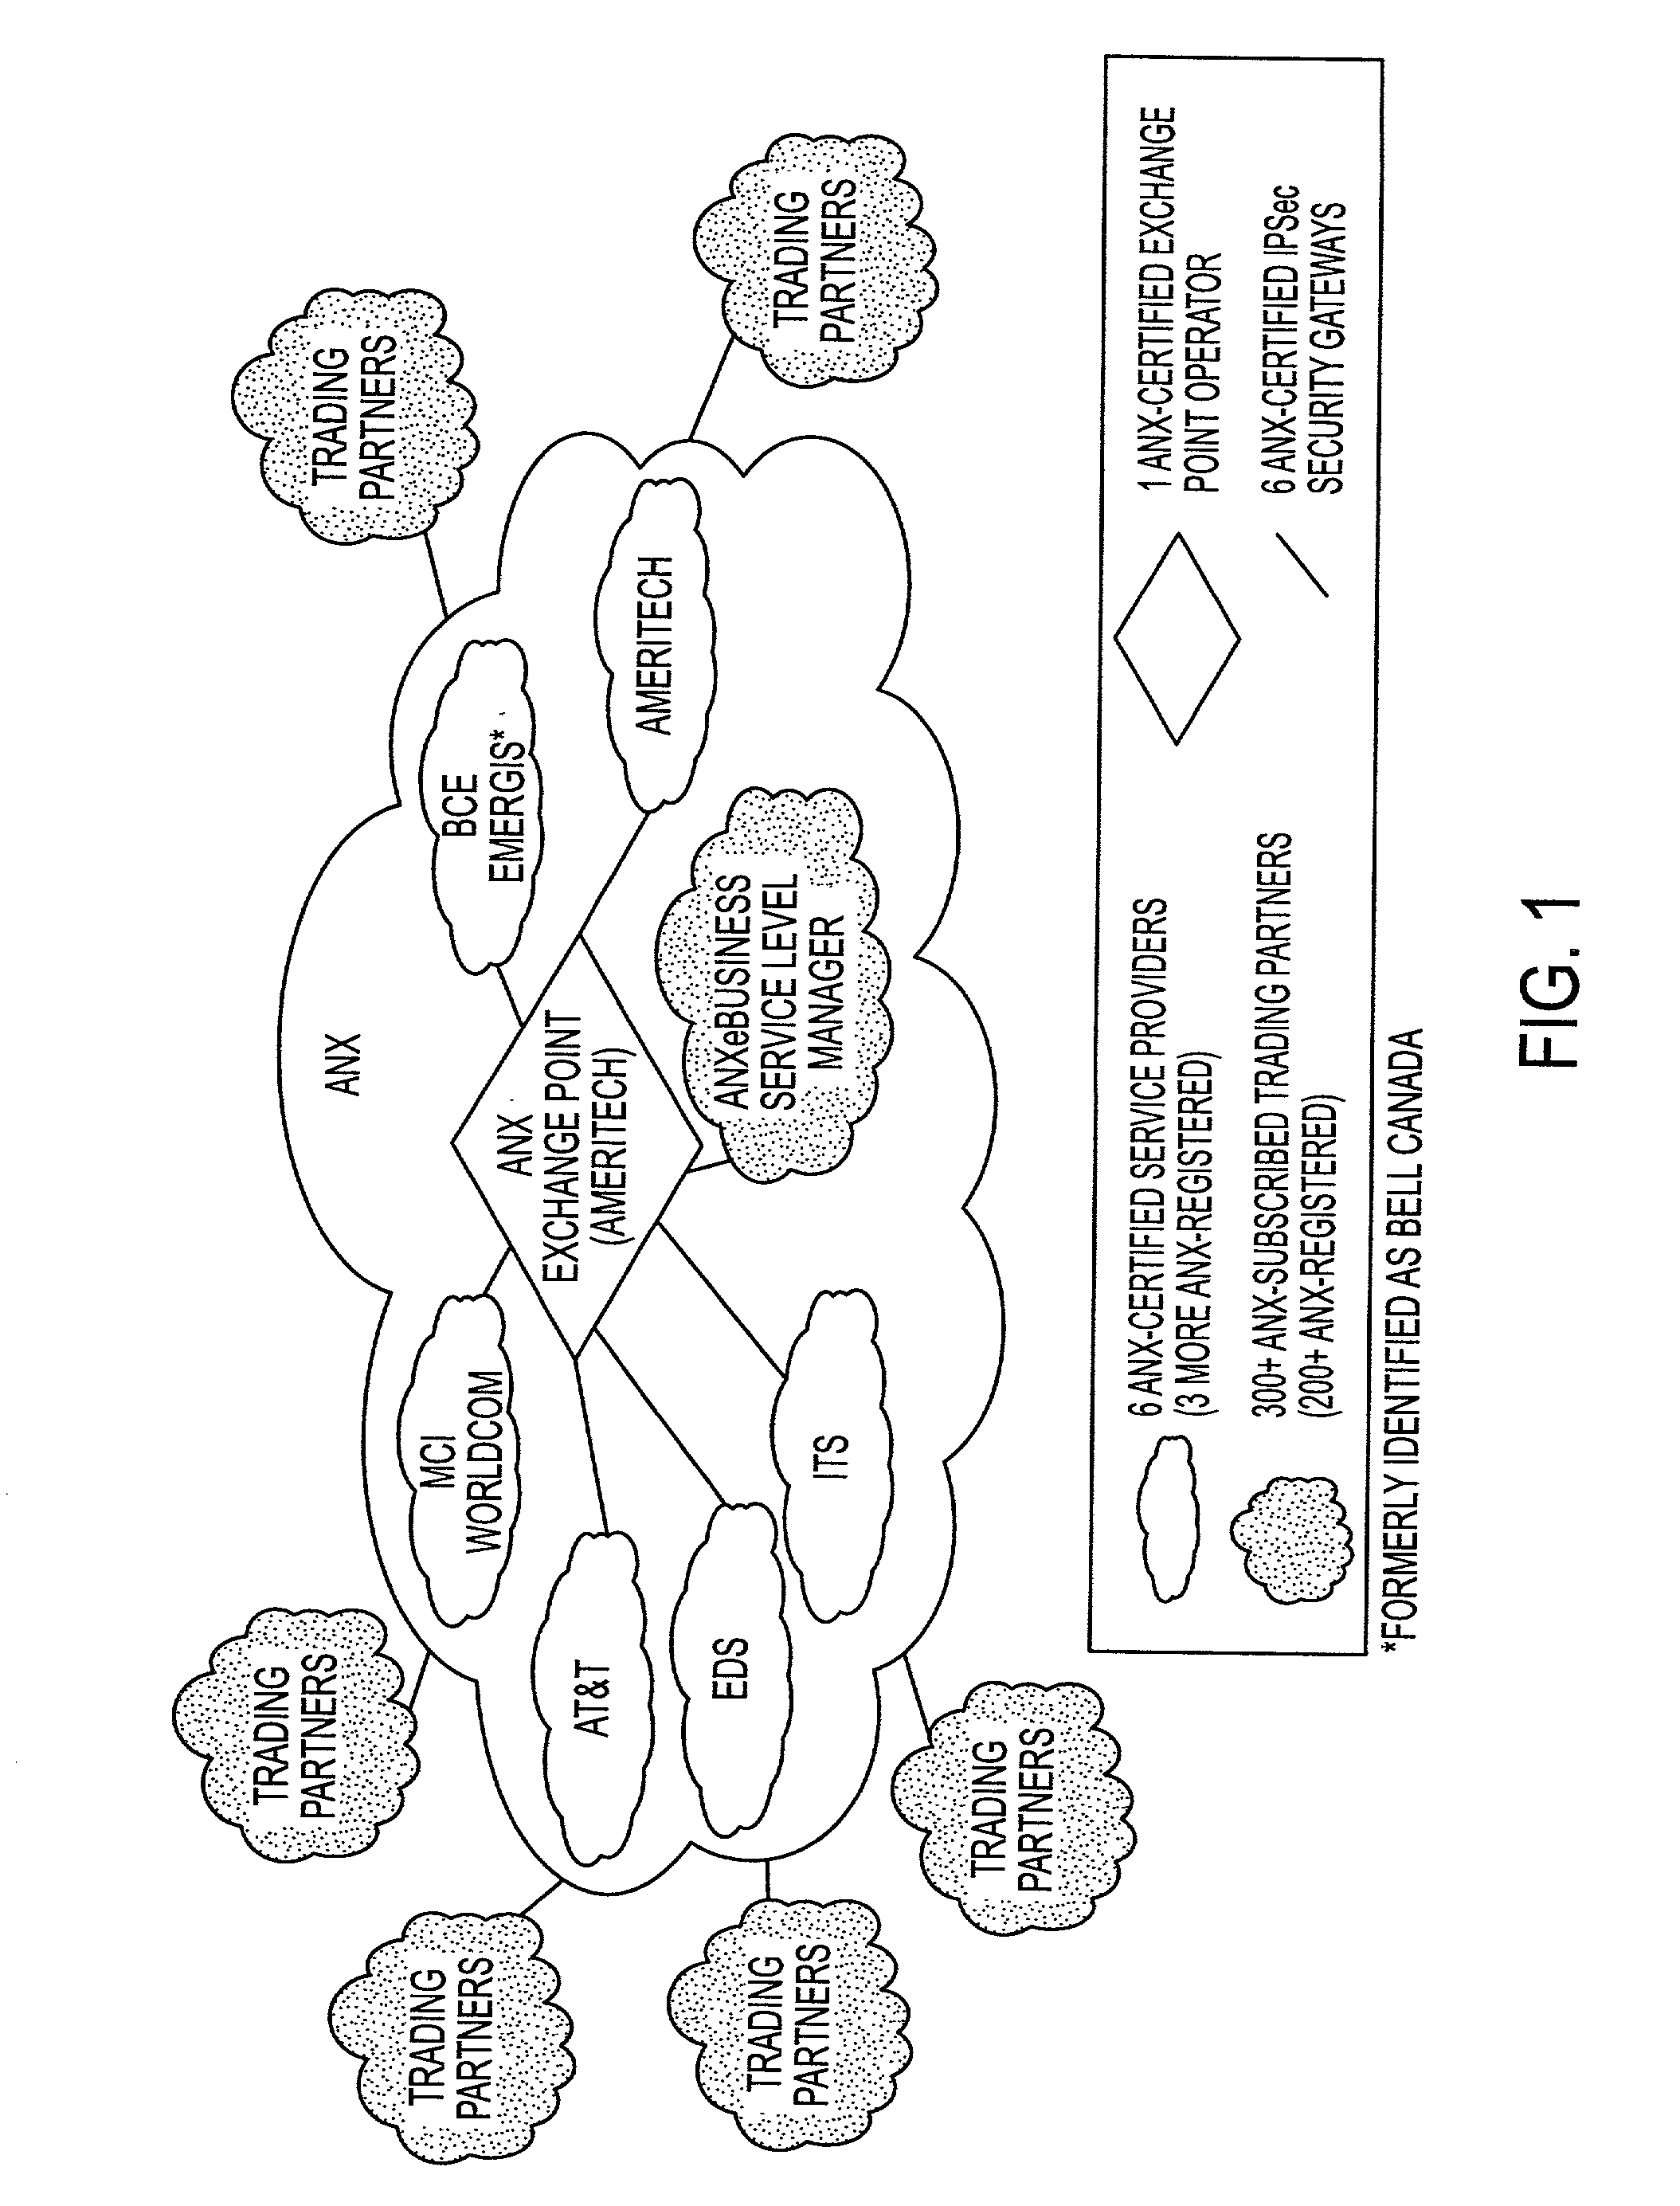 Private network exchange with multiple service providers, having a portal, collaborative applications, and a directory service